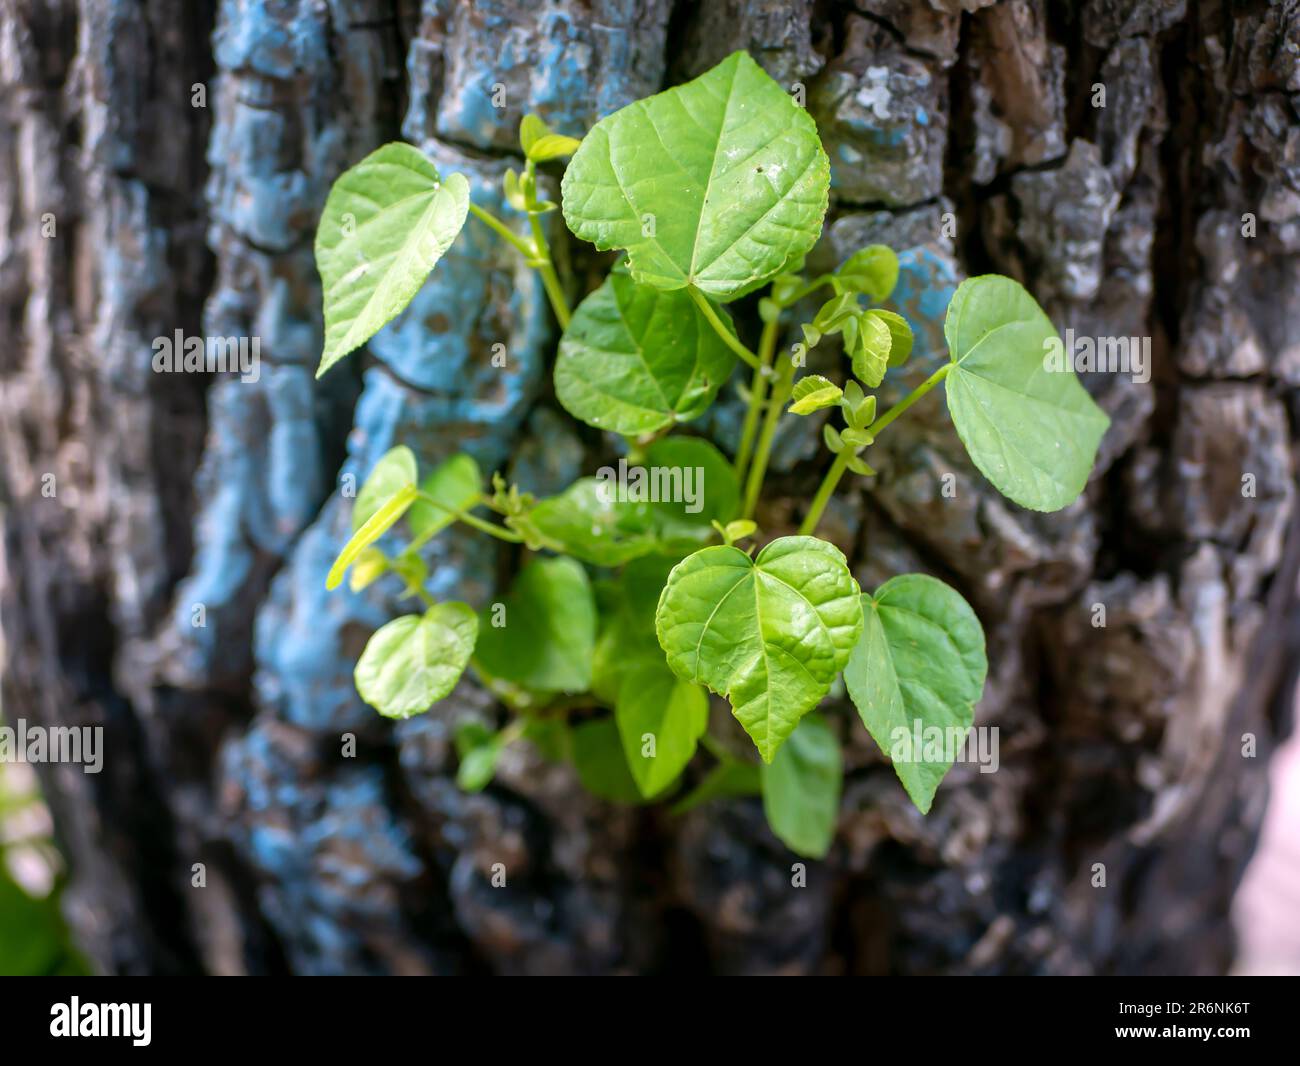 Hibiscus tiliaceus young green leaves, shallow focus Stock Photo